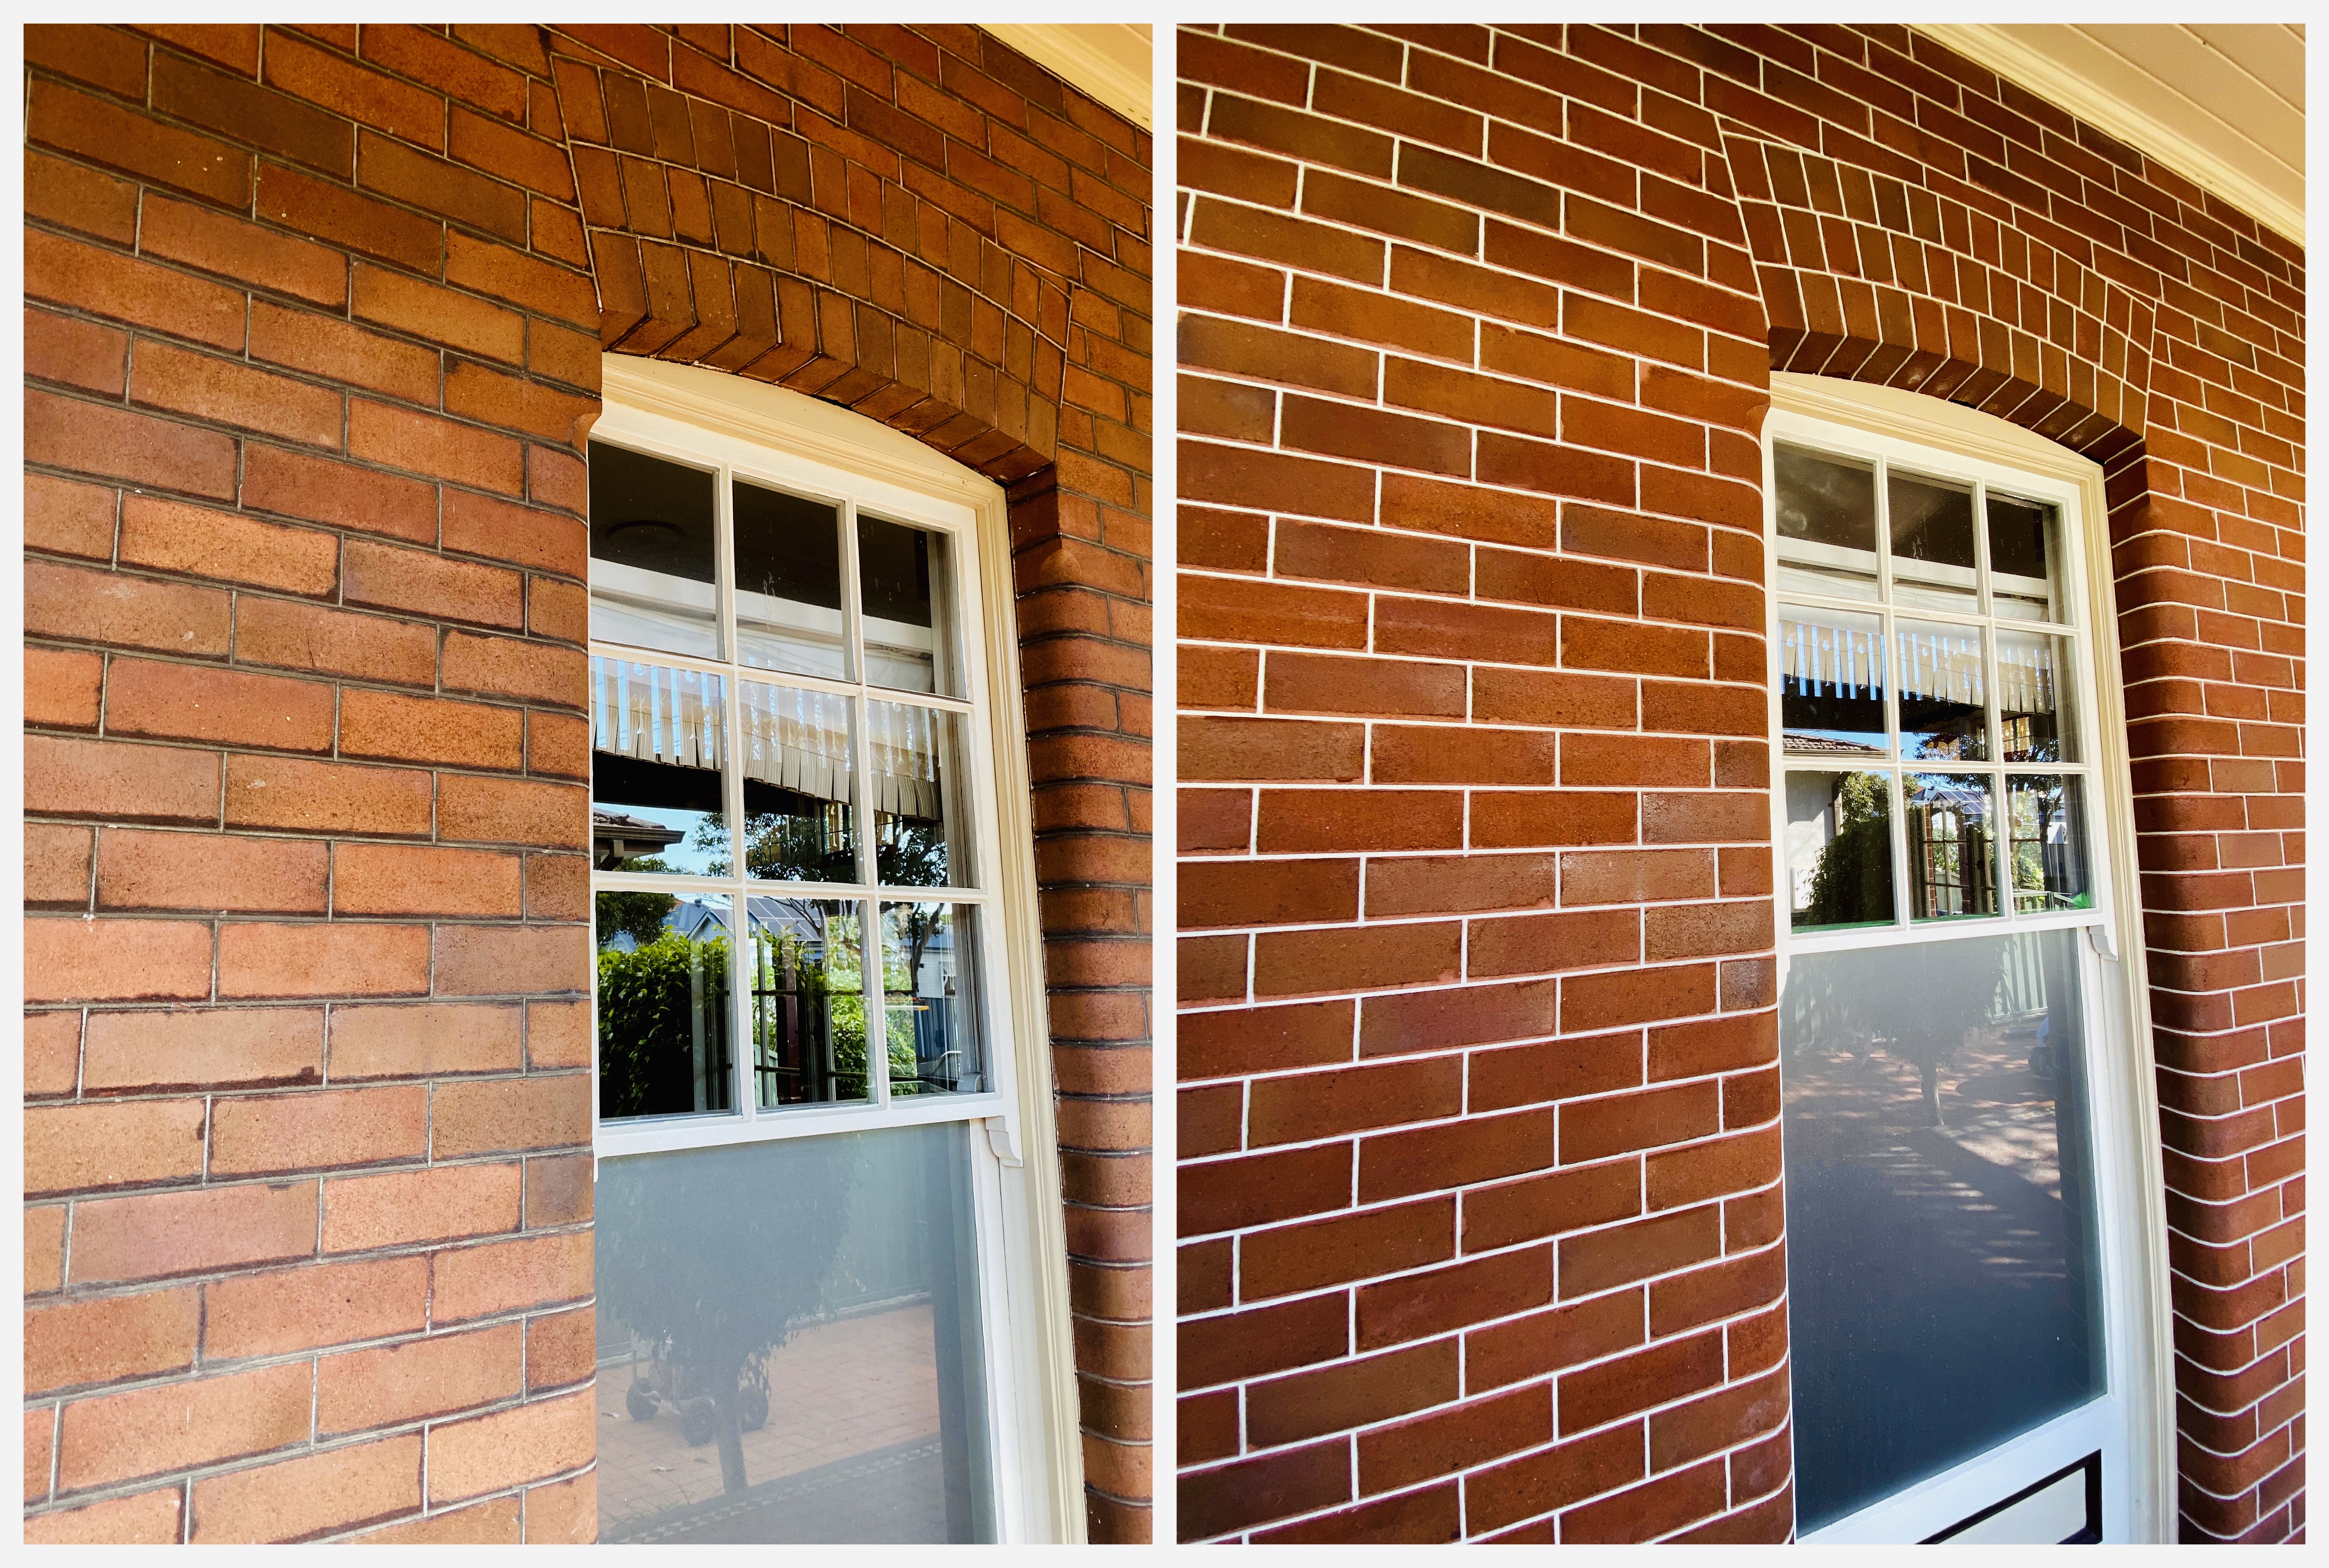 Brick Tuckpointing "Before and After" Everton St Hamilton, Newcastle NSW Australia